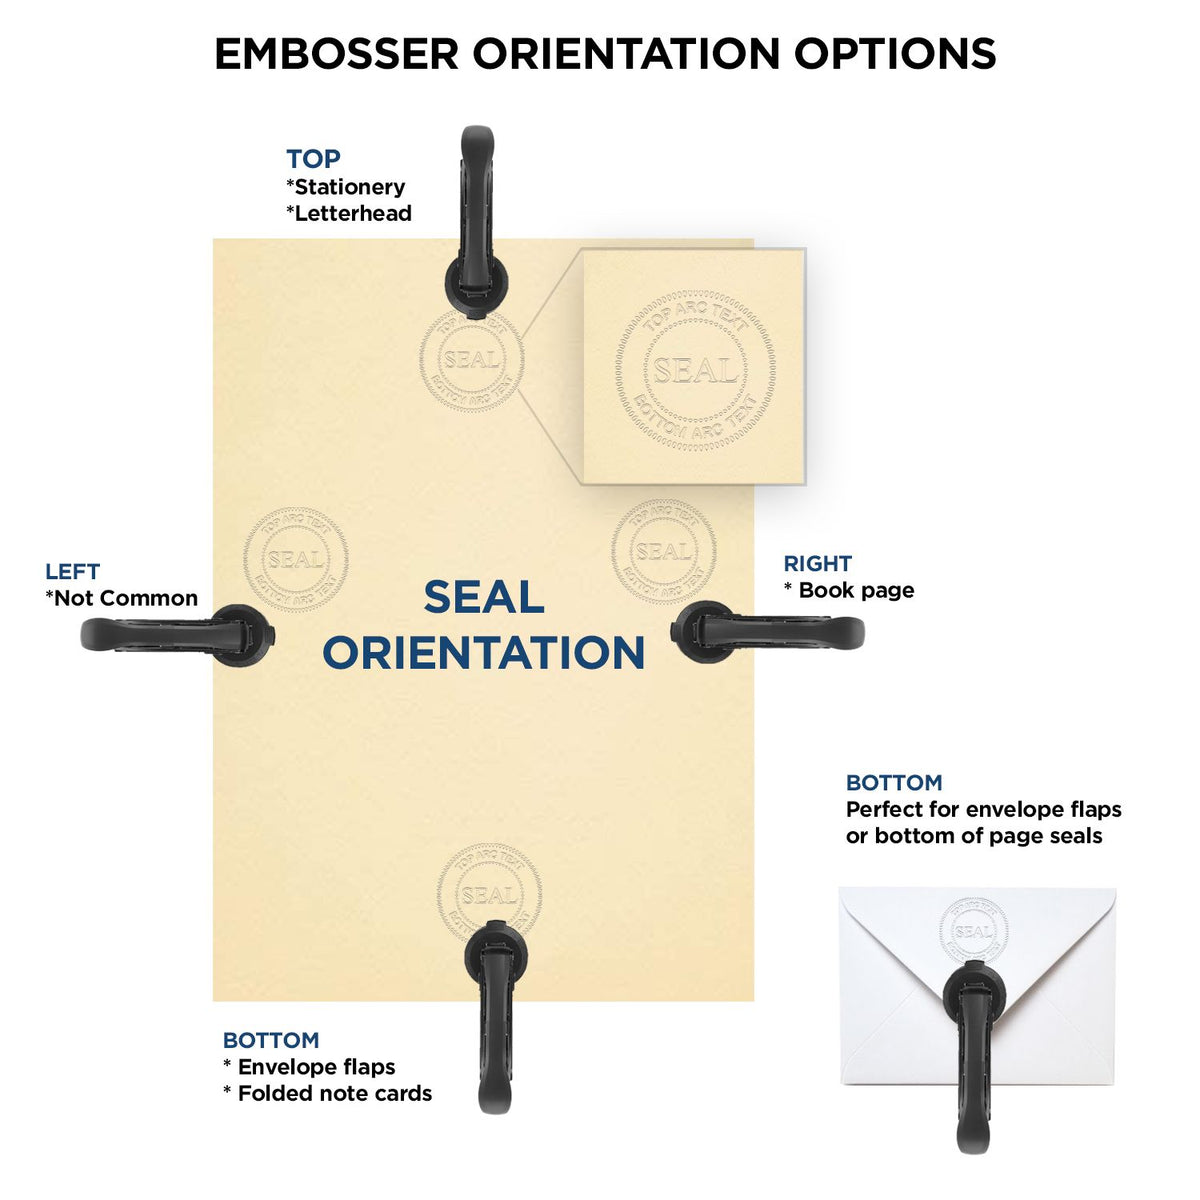 An infographic for the State of North Dakota Long Reach Architectural Embossing Seal showing embosser orientation, this is showing examples of a top, bottom, right and left insert.